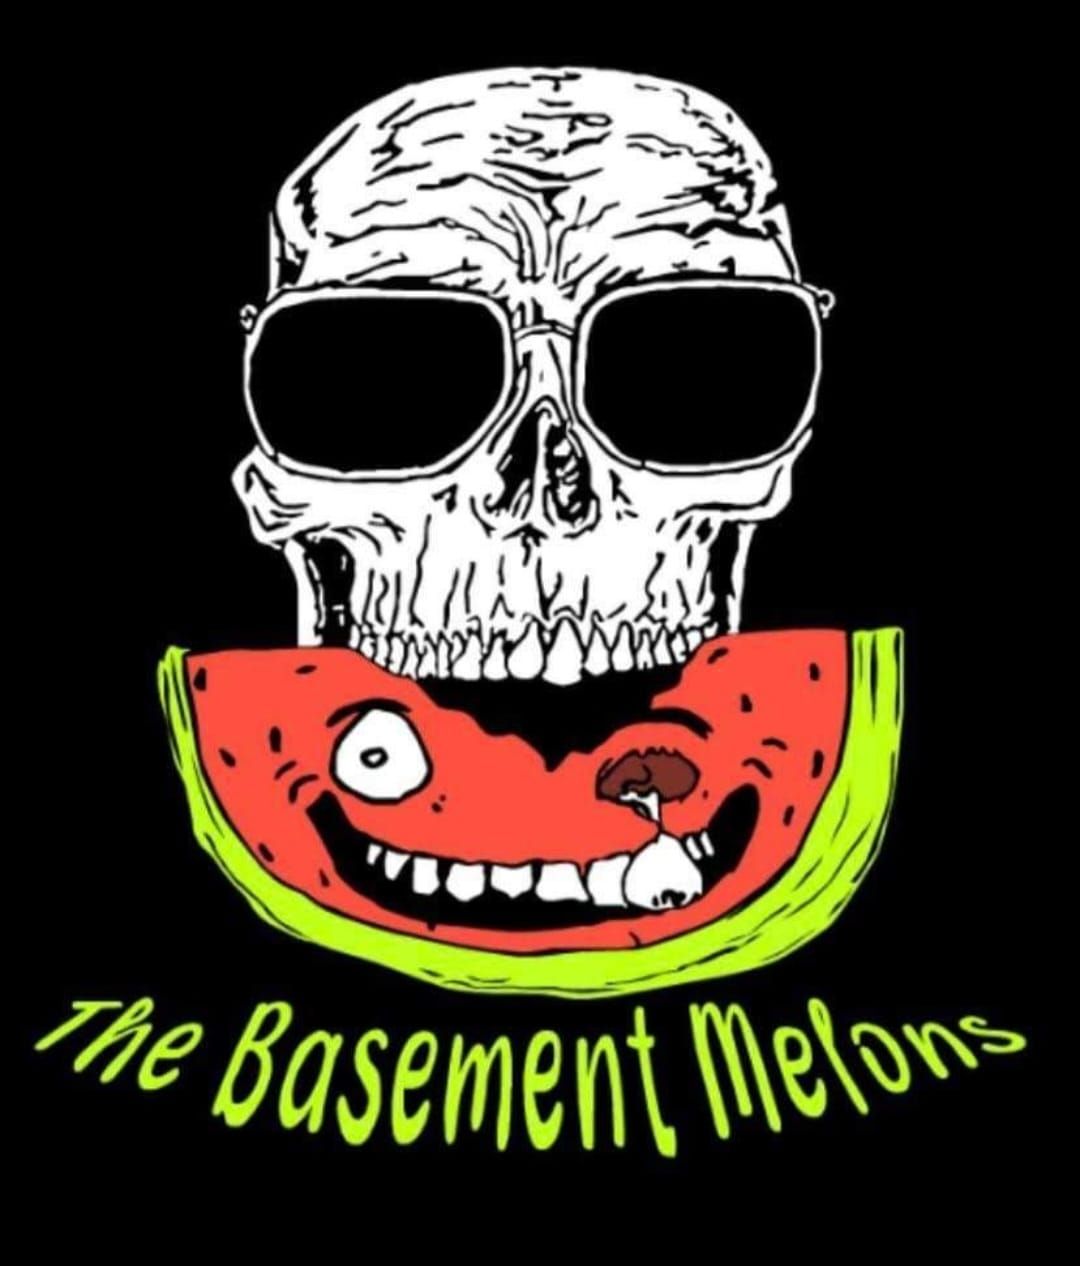 Out of Commission with The Basement Melons